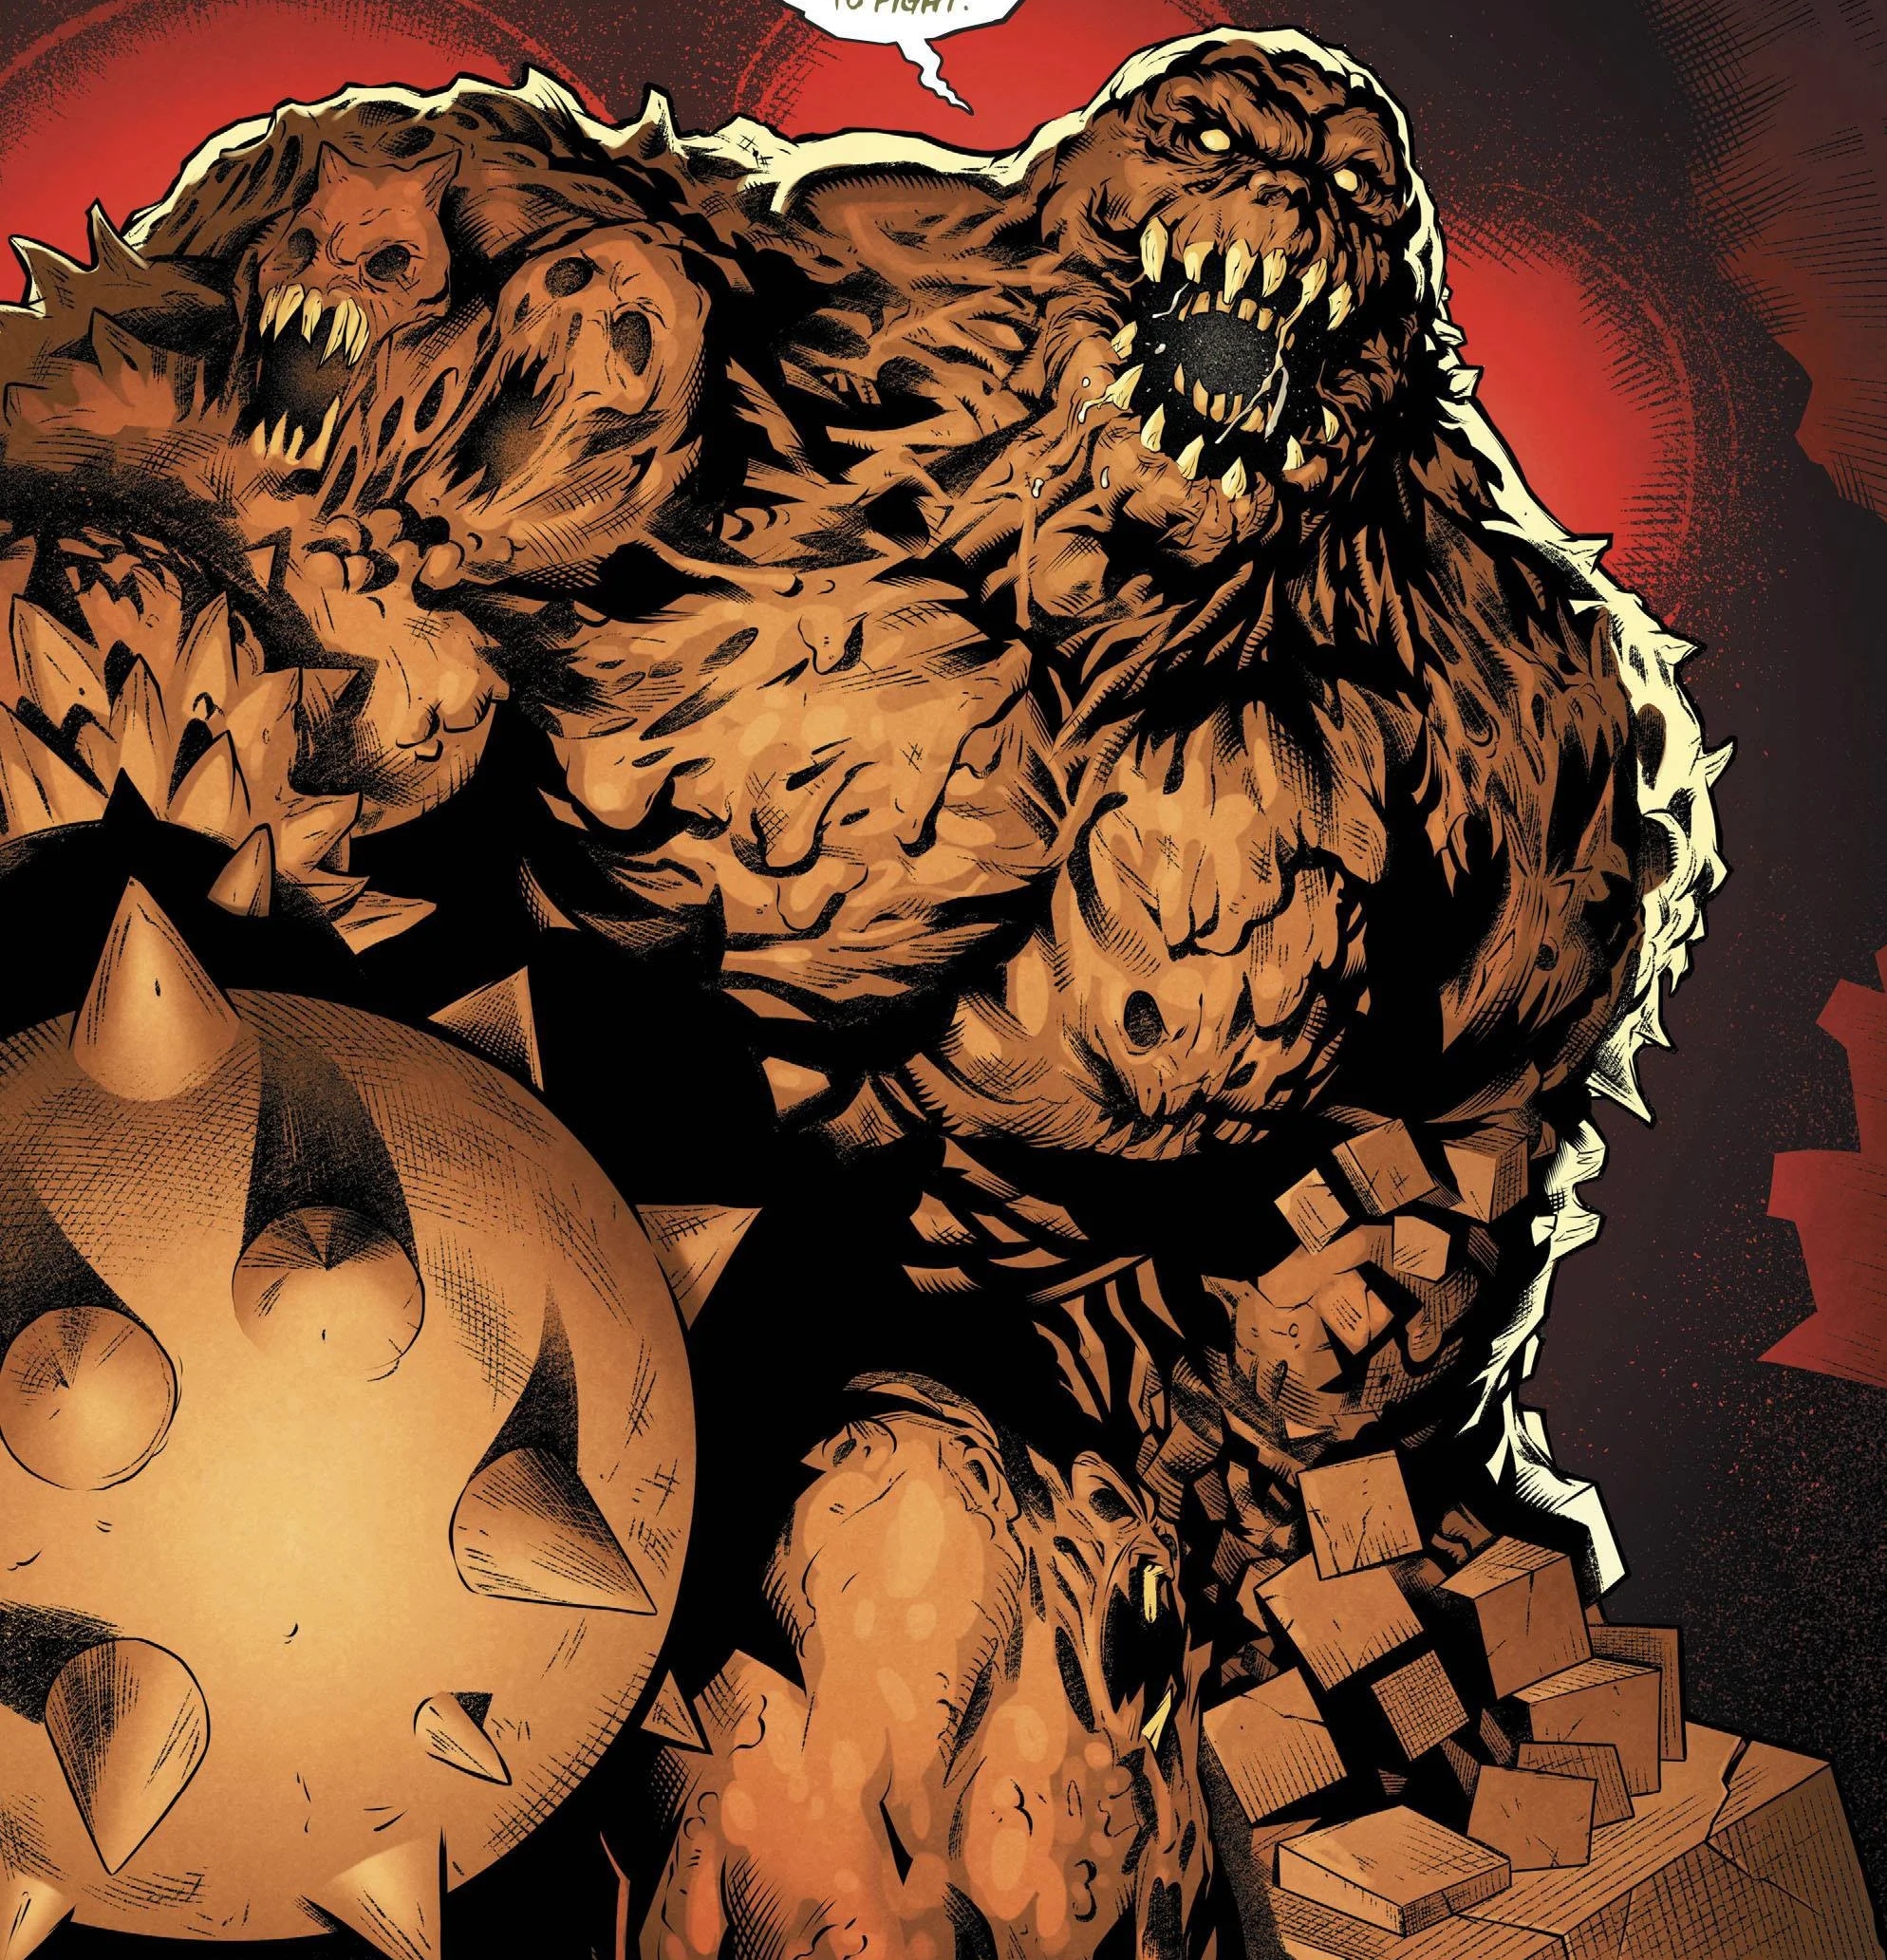 Some of the finest Clayface stories